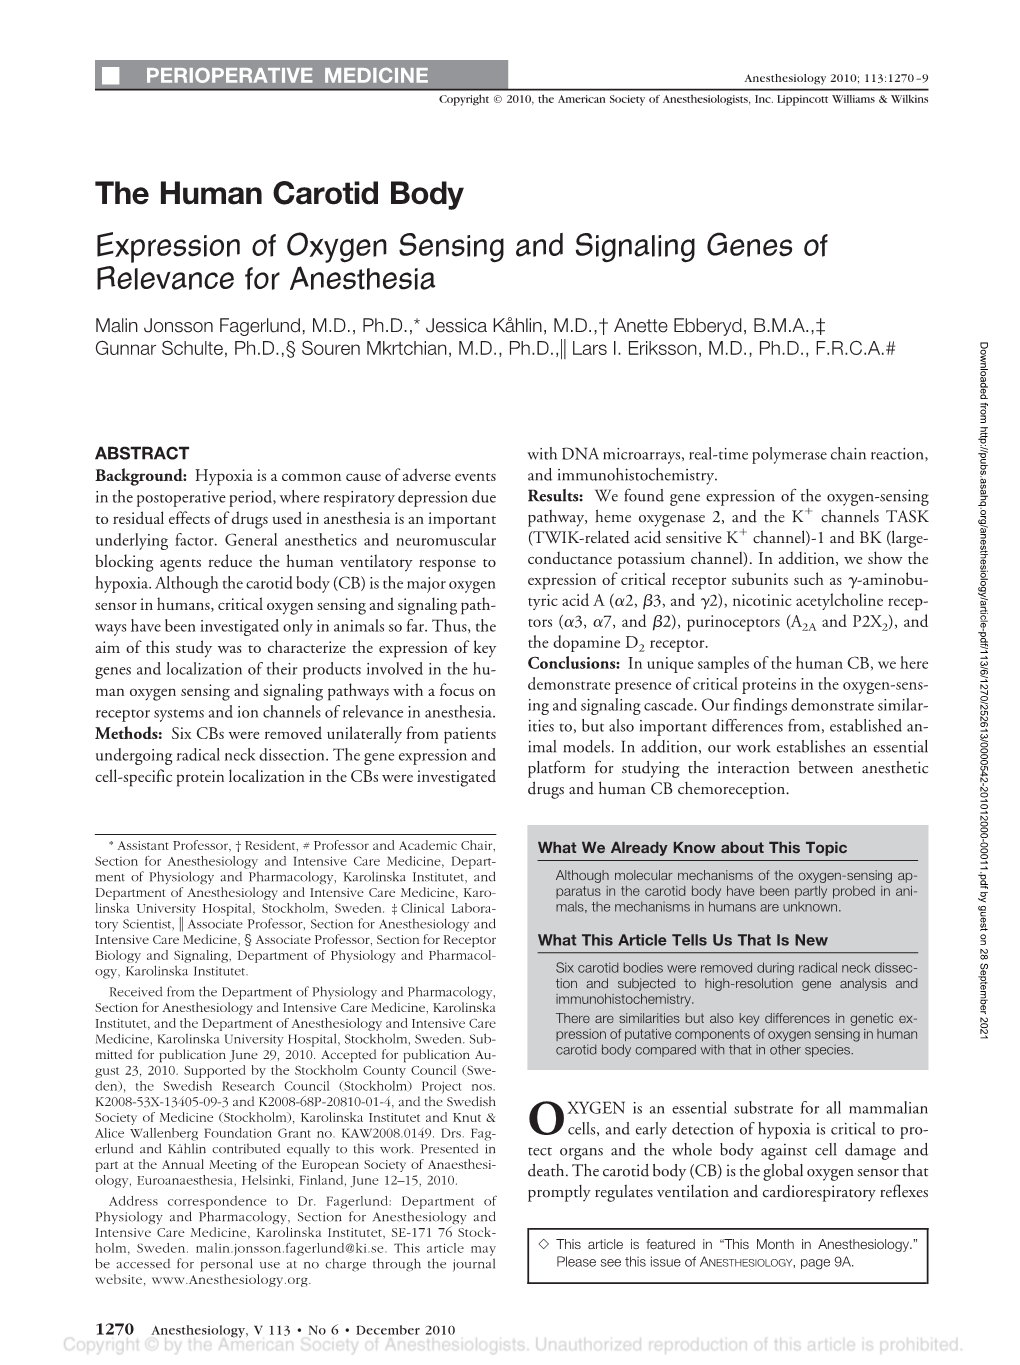 The Human Carotid Body Expression of Oxygen Sensing and Signaling Genes of Relevance for Anesthesia